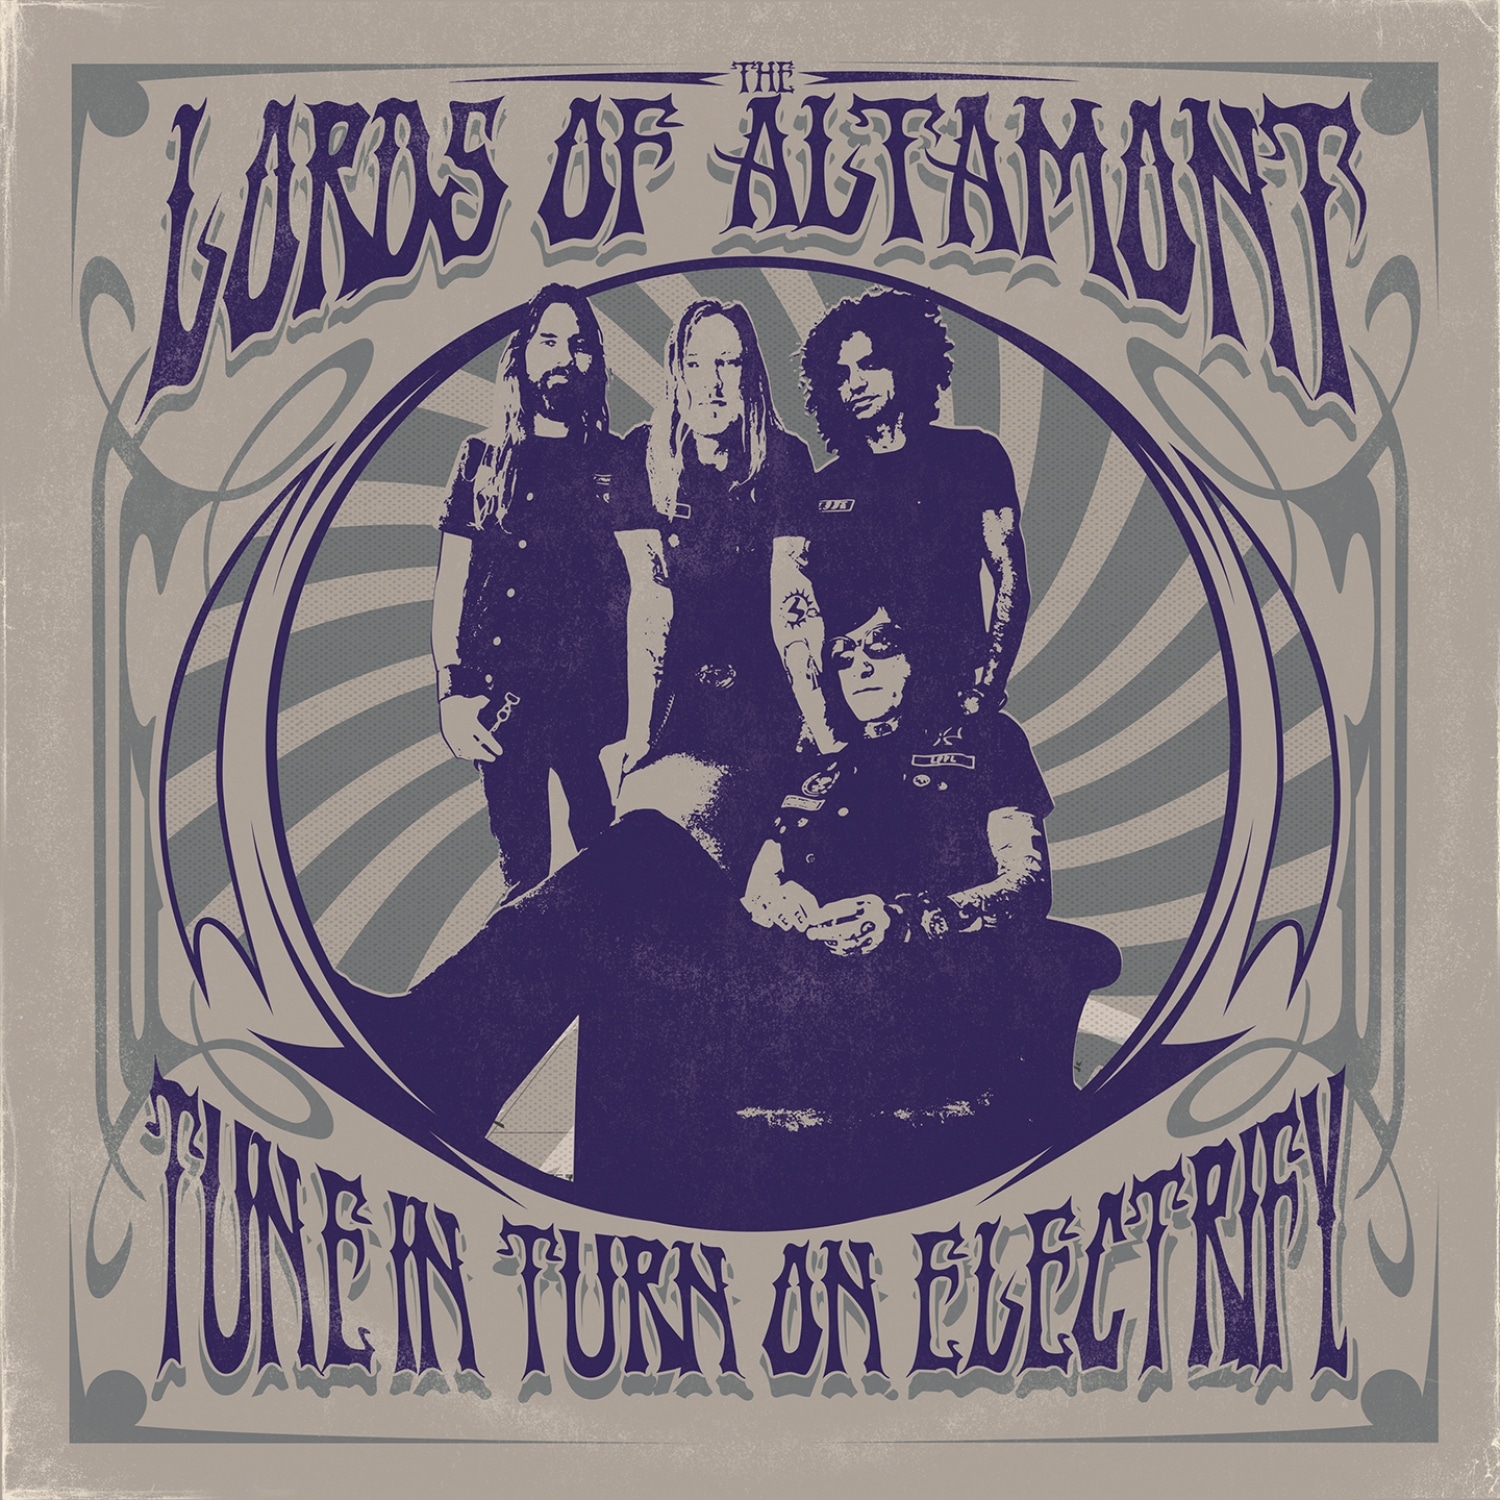 Heavy Psych - Lords Of Altamont - “Turn In, Turn On, Electrify! - 2021, Heavy Psych Sounds